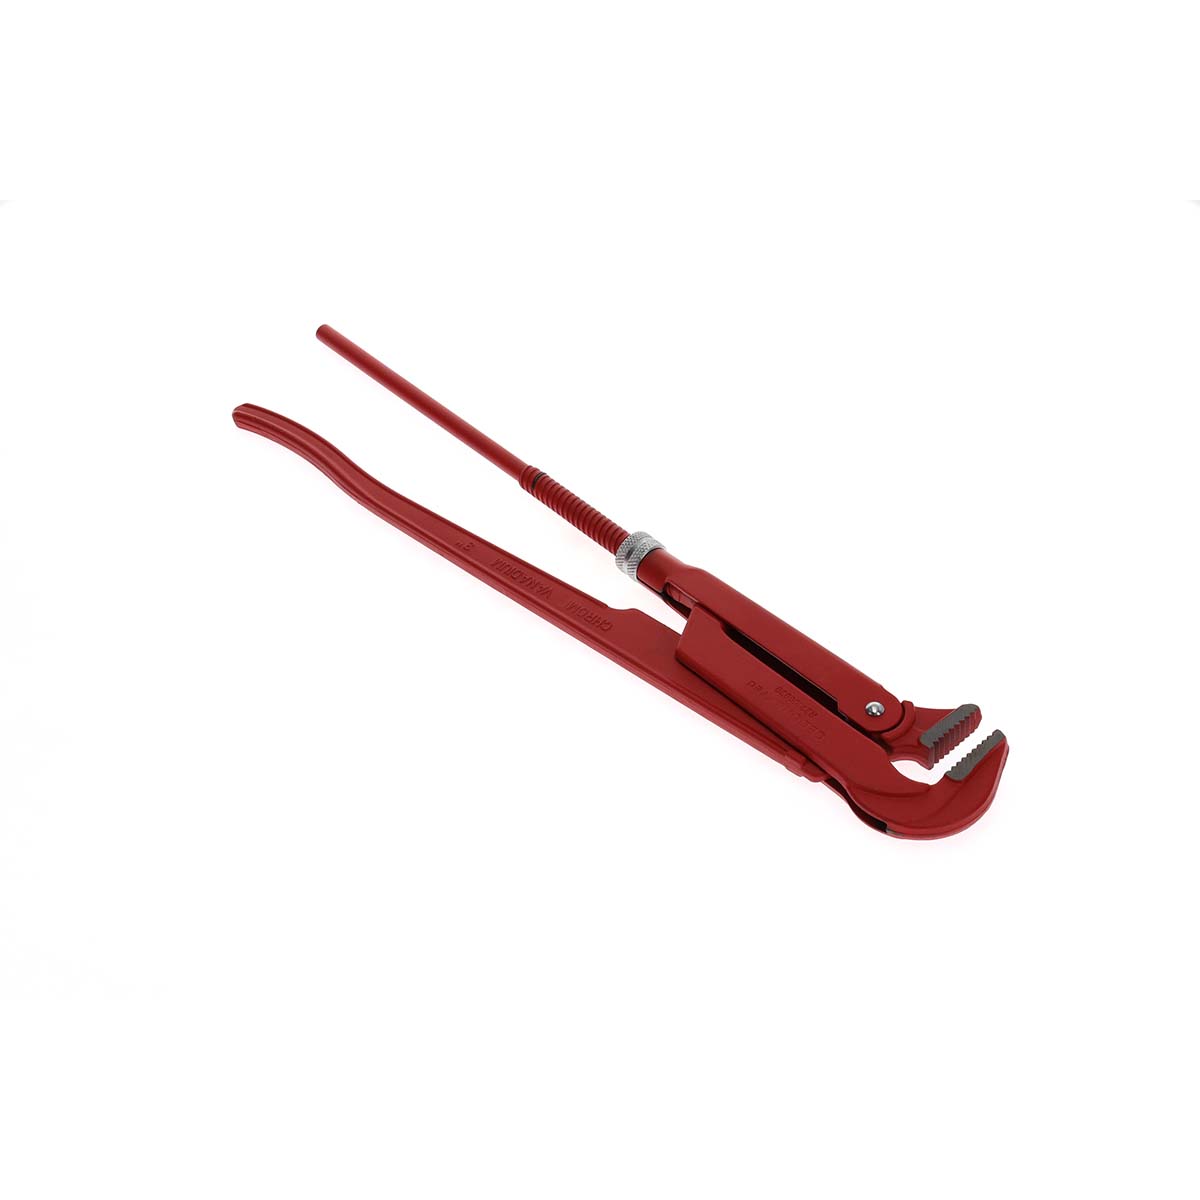 GEDORE red R27100030 - Pipe pliers 90°, Swedish model, 3 inches, L=635 mm (3301160)